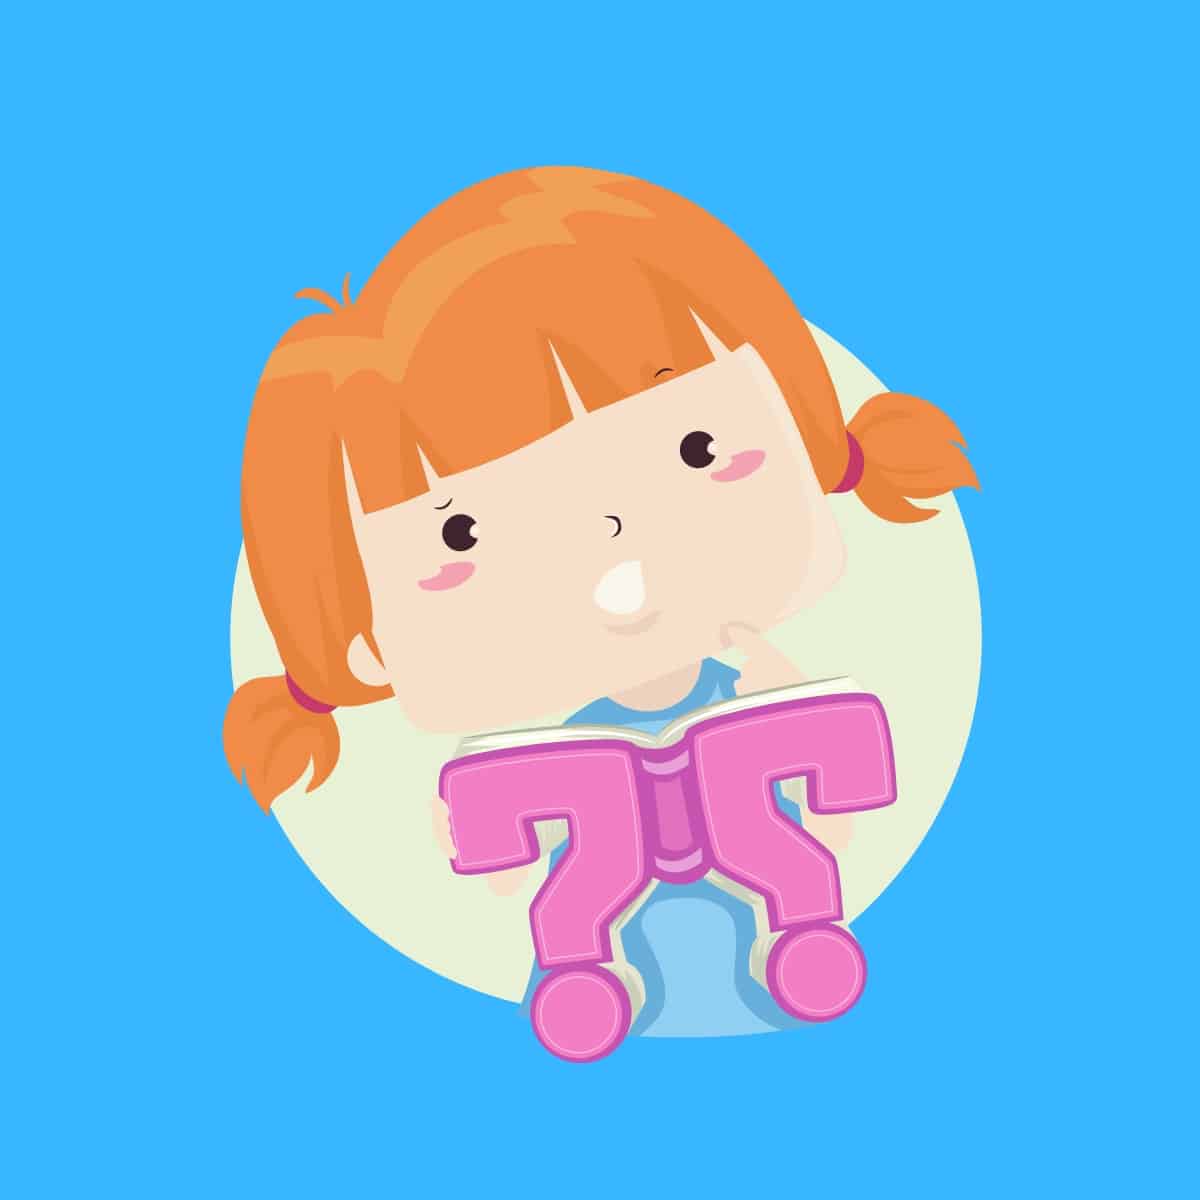 Cartoon graphic of a girl thinking about math riddles with two question marks under her face on a blue background.